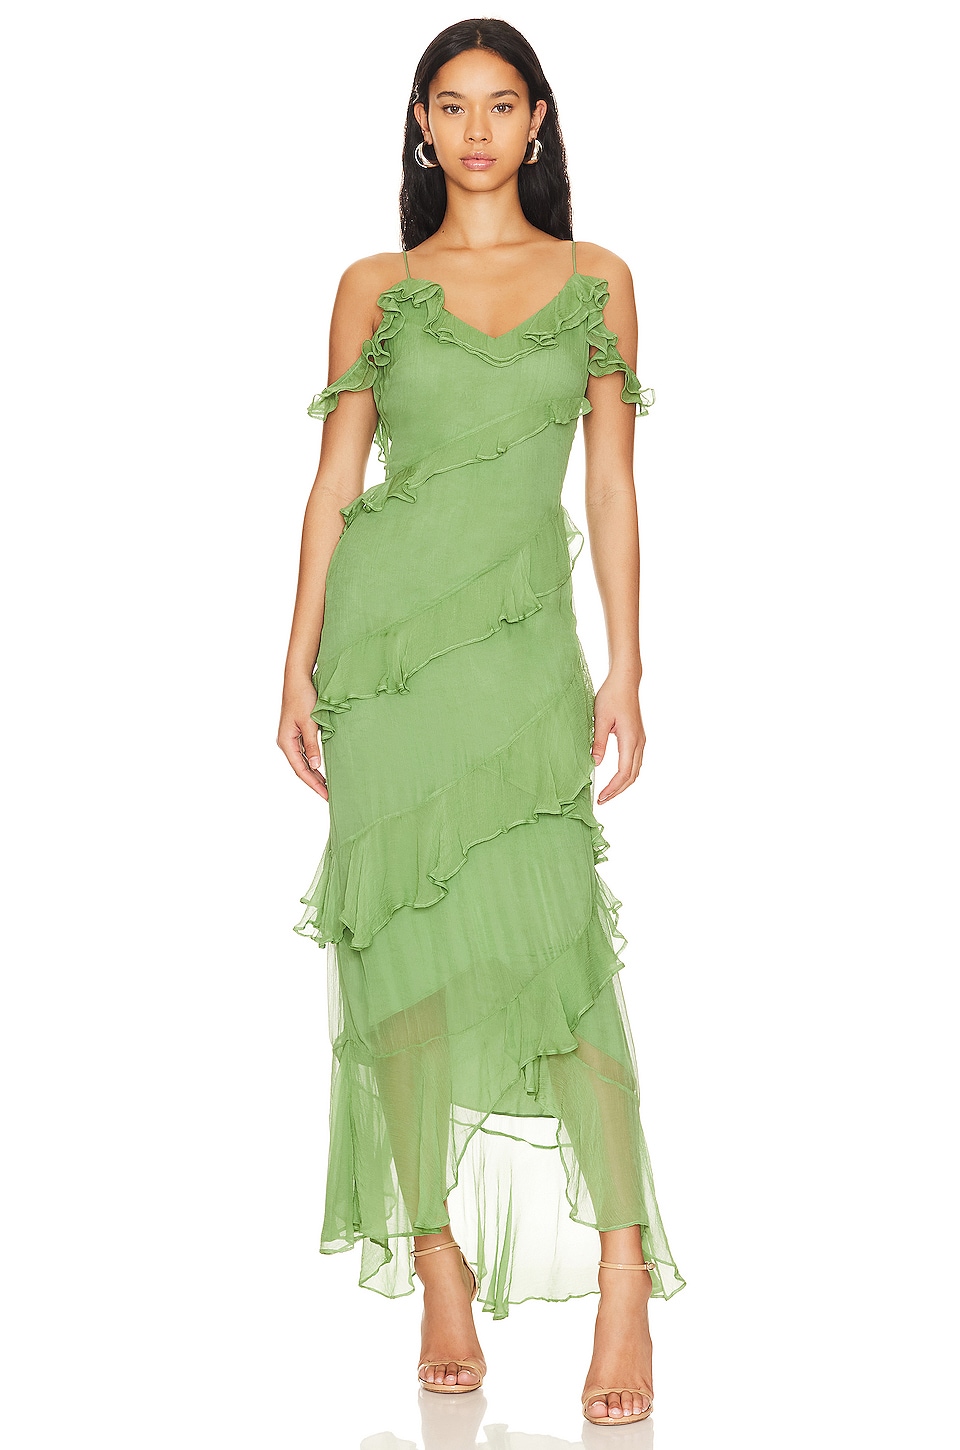 House of Harlow 1960 x REVOLVE Maxime Maxi Dress in Light Green